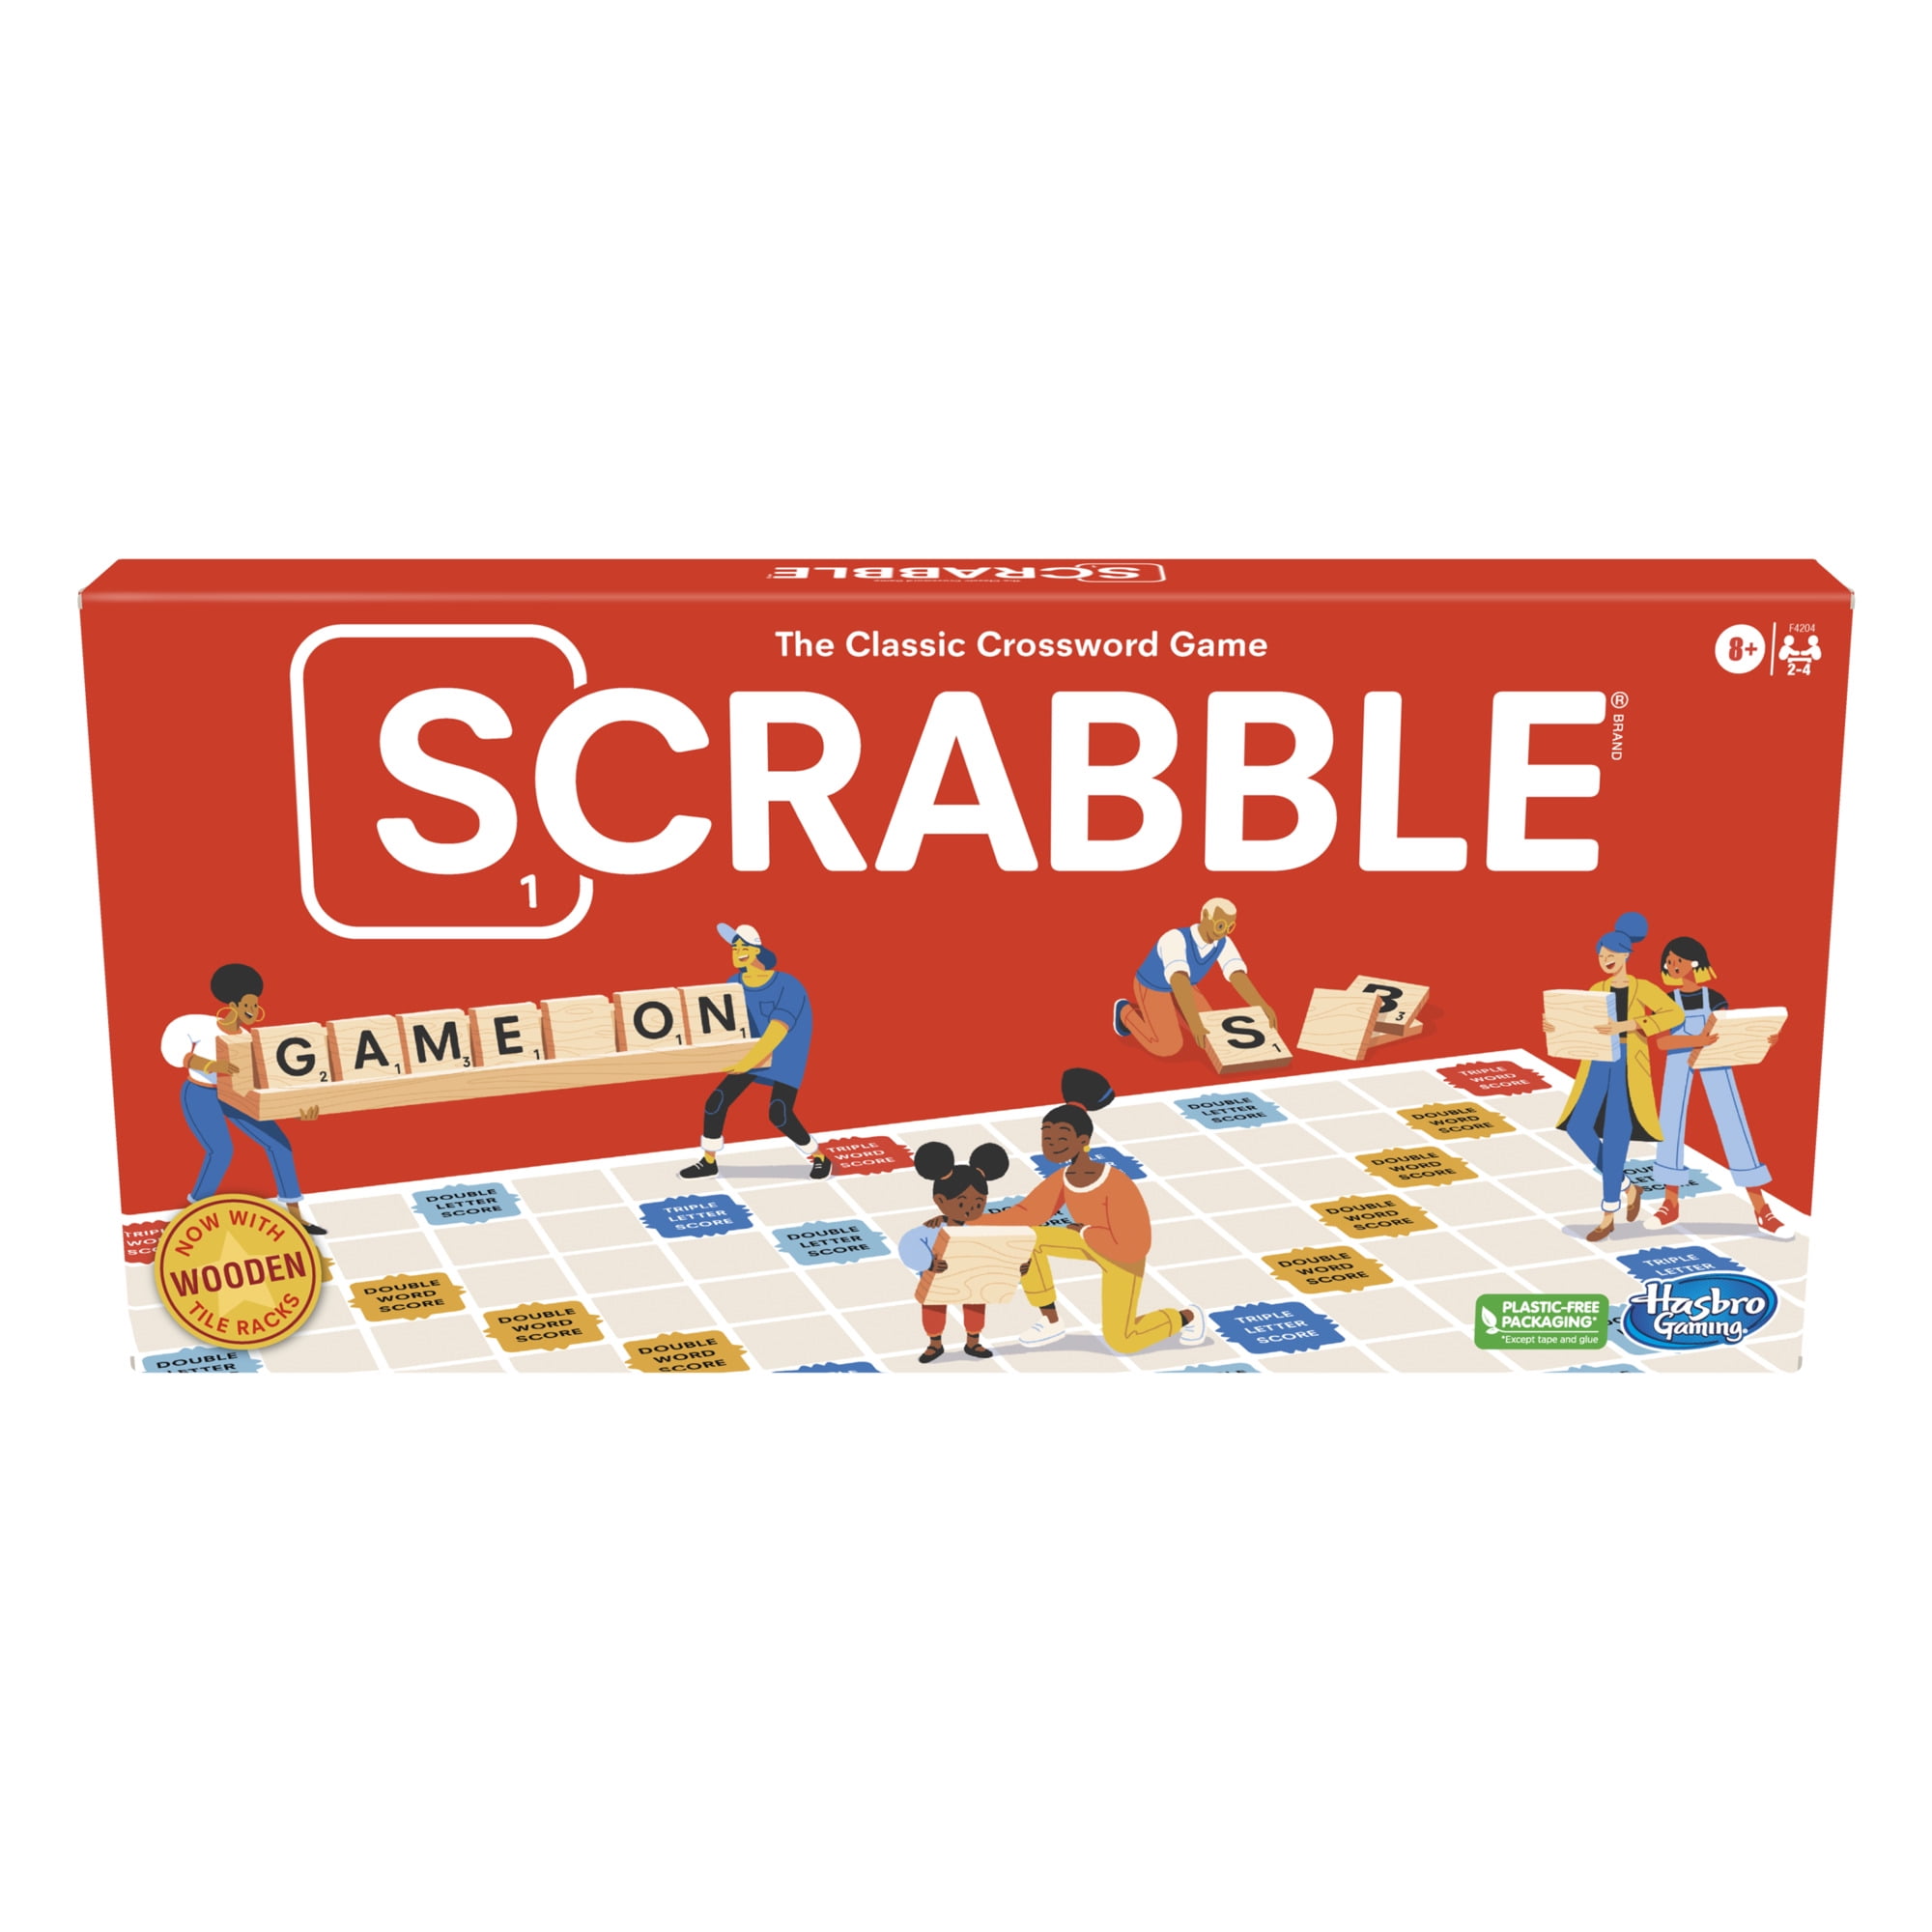 Scrabble Board Game, Fun Family Game For 2-4 Players